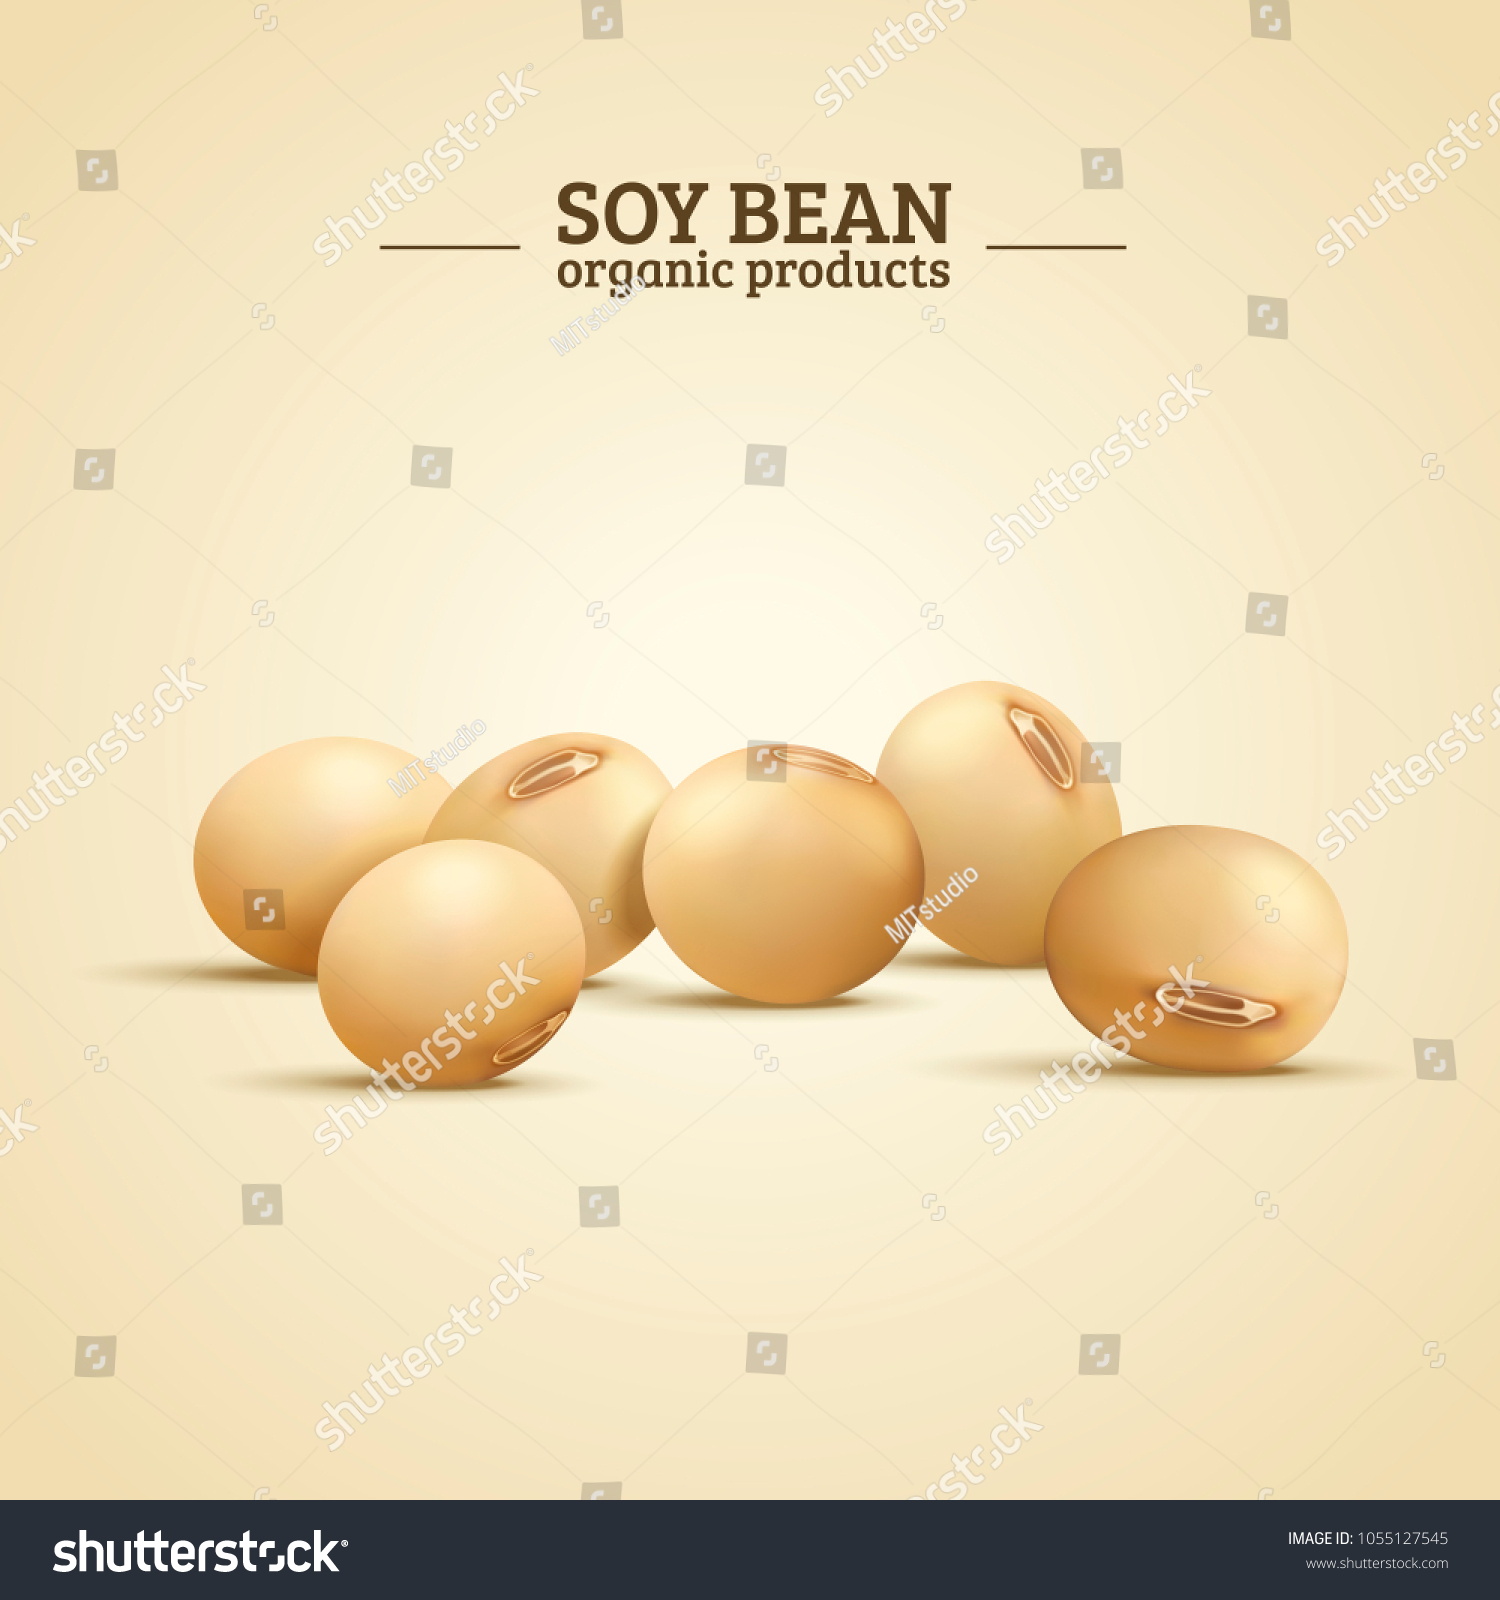 Soy bean elements, organic and natural food in 3d illustration #1055127545